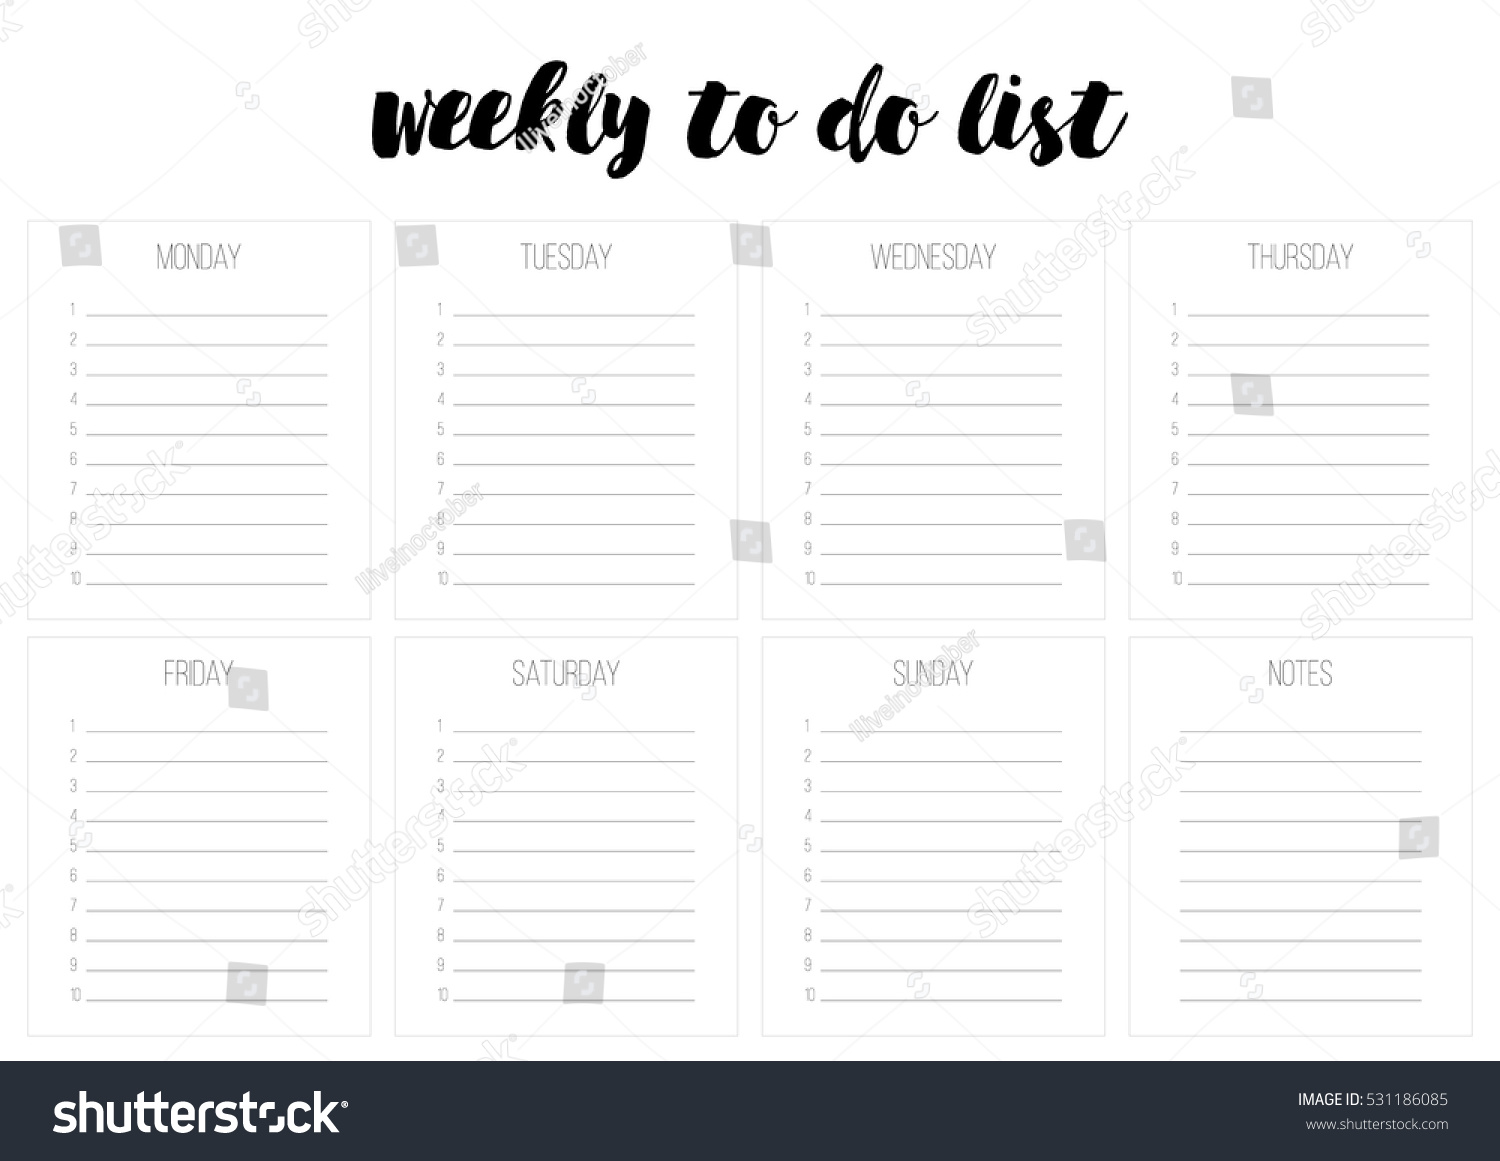 stock-vector-weekly-to-do-list For Blank To Do List Template